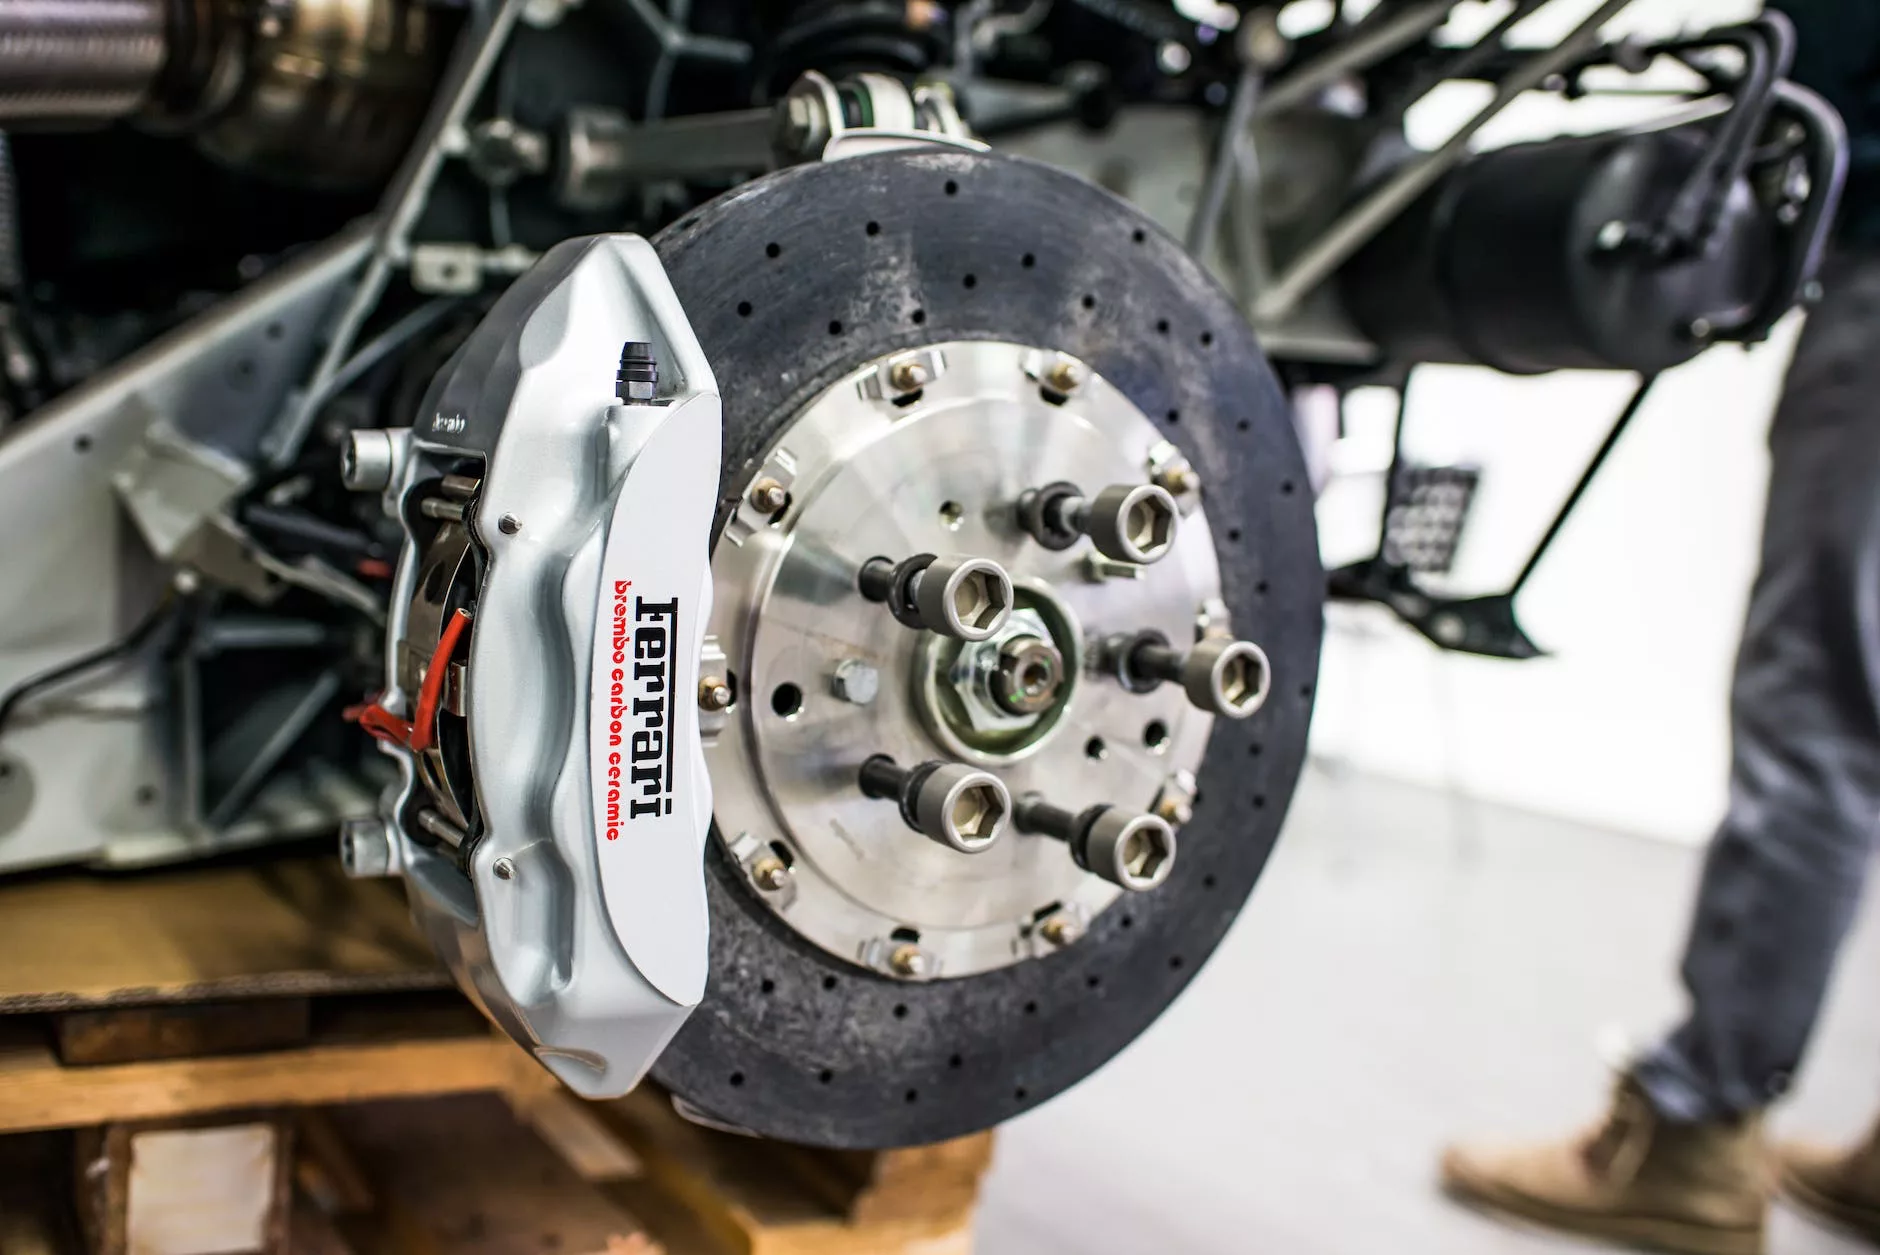 Brake Inspection: Ensuring Safety on the Road